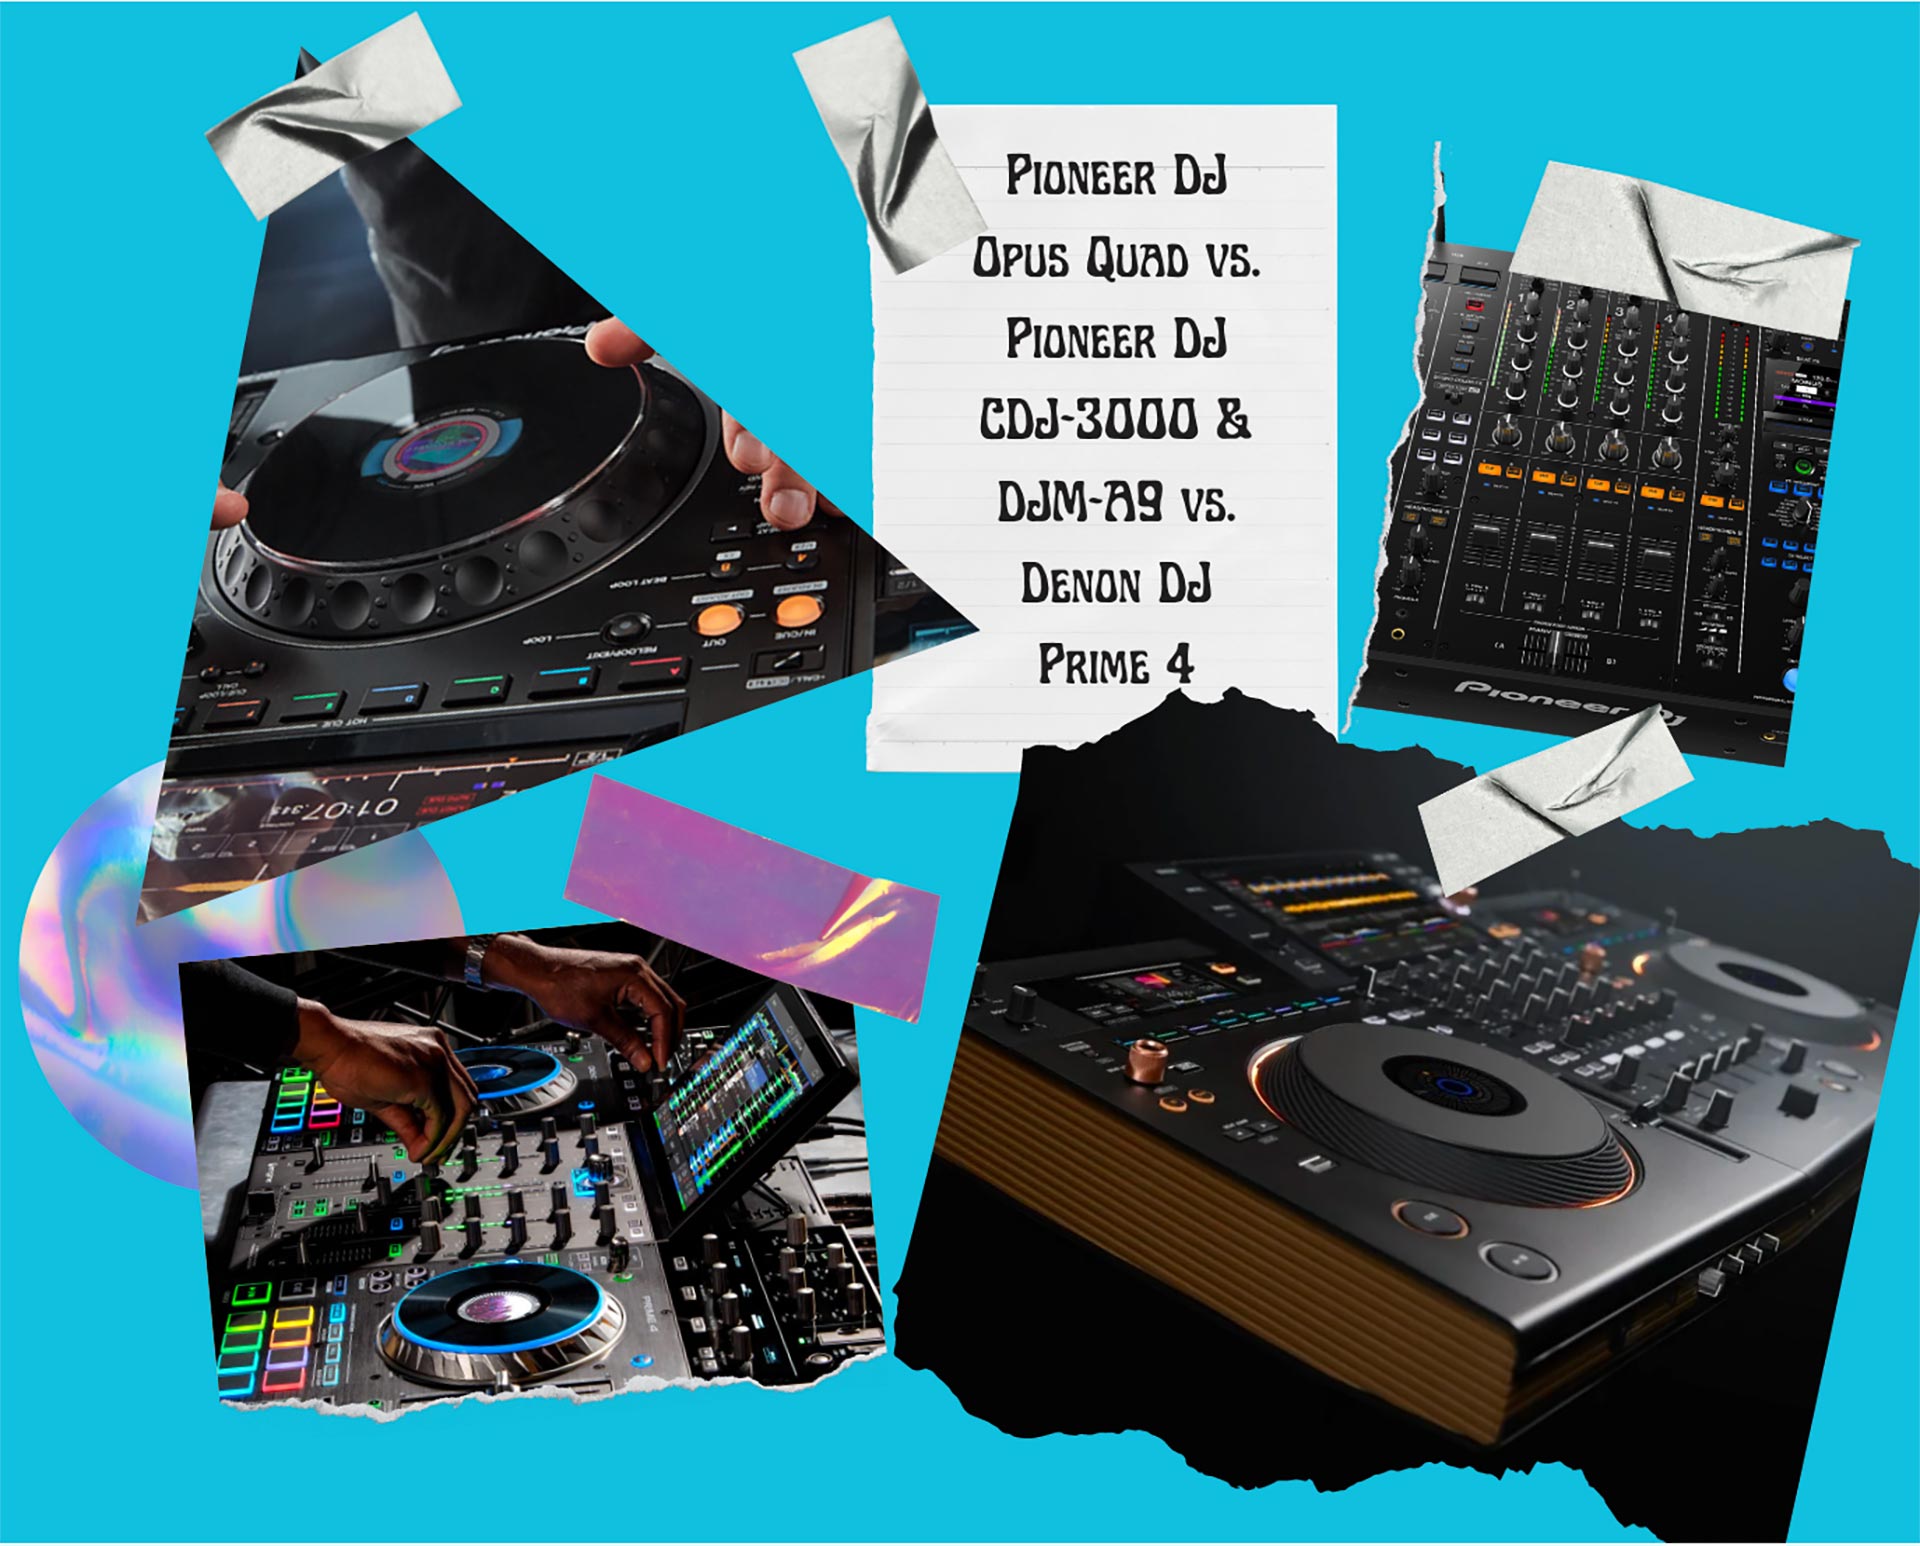 Pioneer DJ OPUS-QUAD - How does it compare to other DJ gear? Image